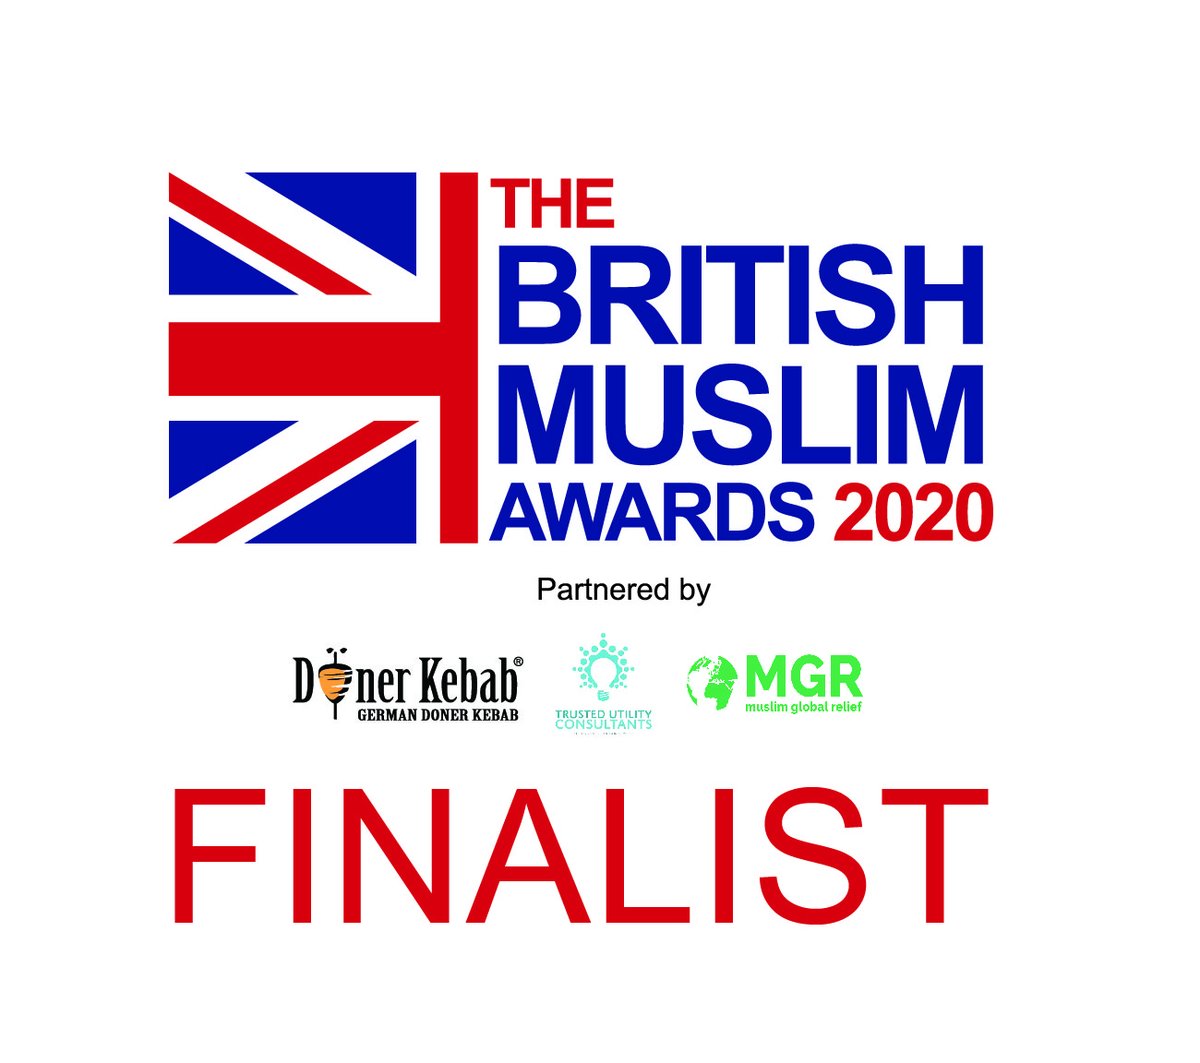 Thank you to whoever nominated me, I didn't expect this! And this is only because awards and accolades aren't the driving forces behind what I do. I've been a recluse from the UK for a while, but I am incredibly humbled. #britishmuslimawards